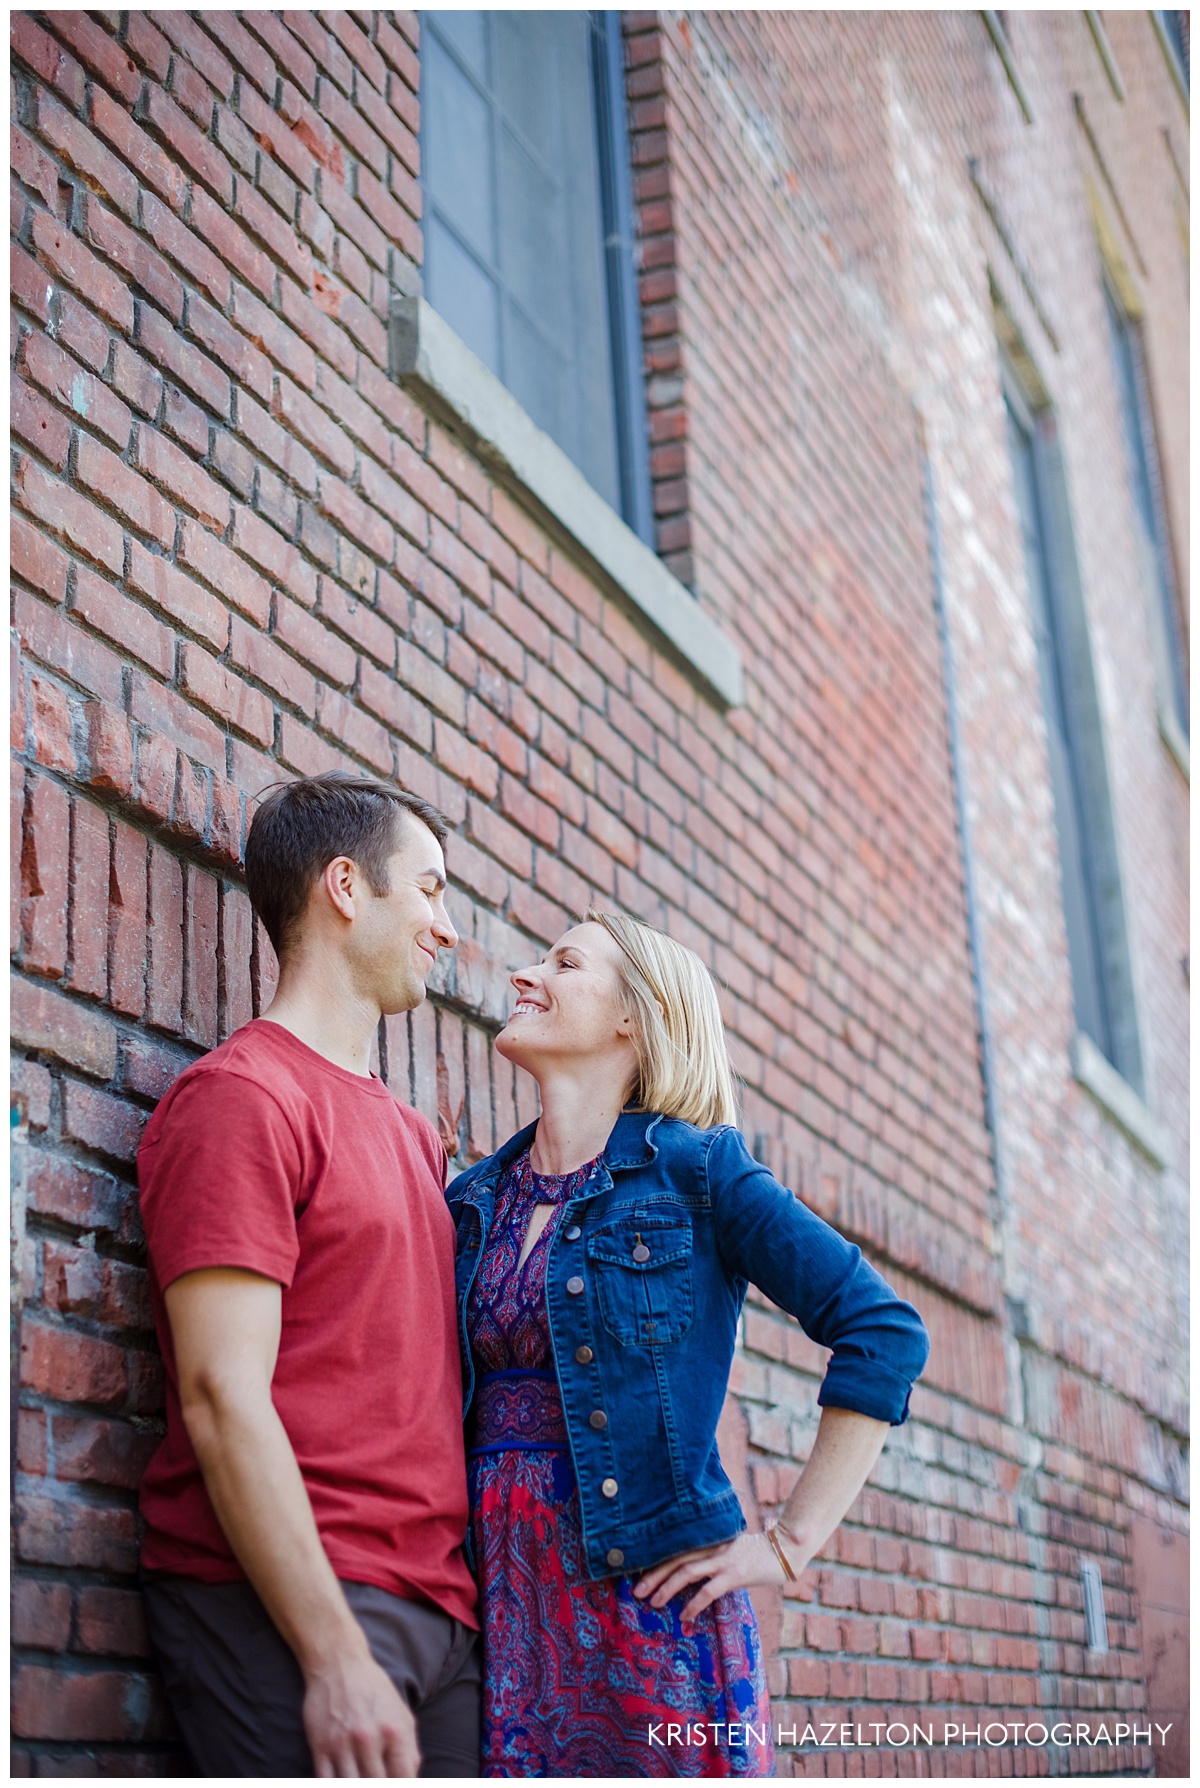 Engaged couple posing next to an old brick building